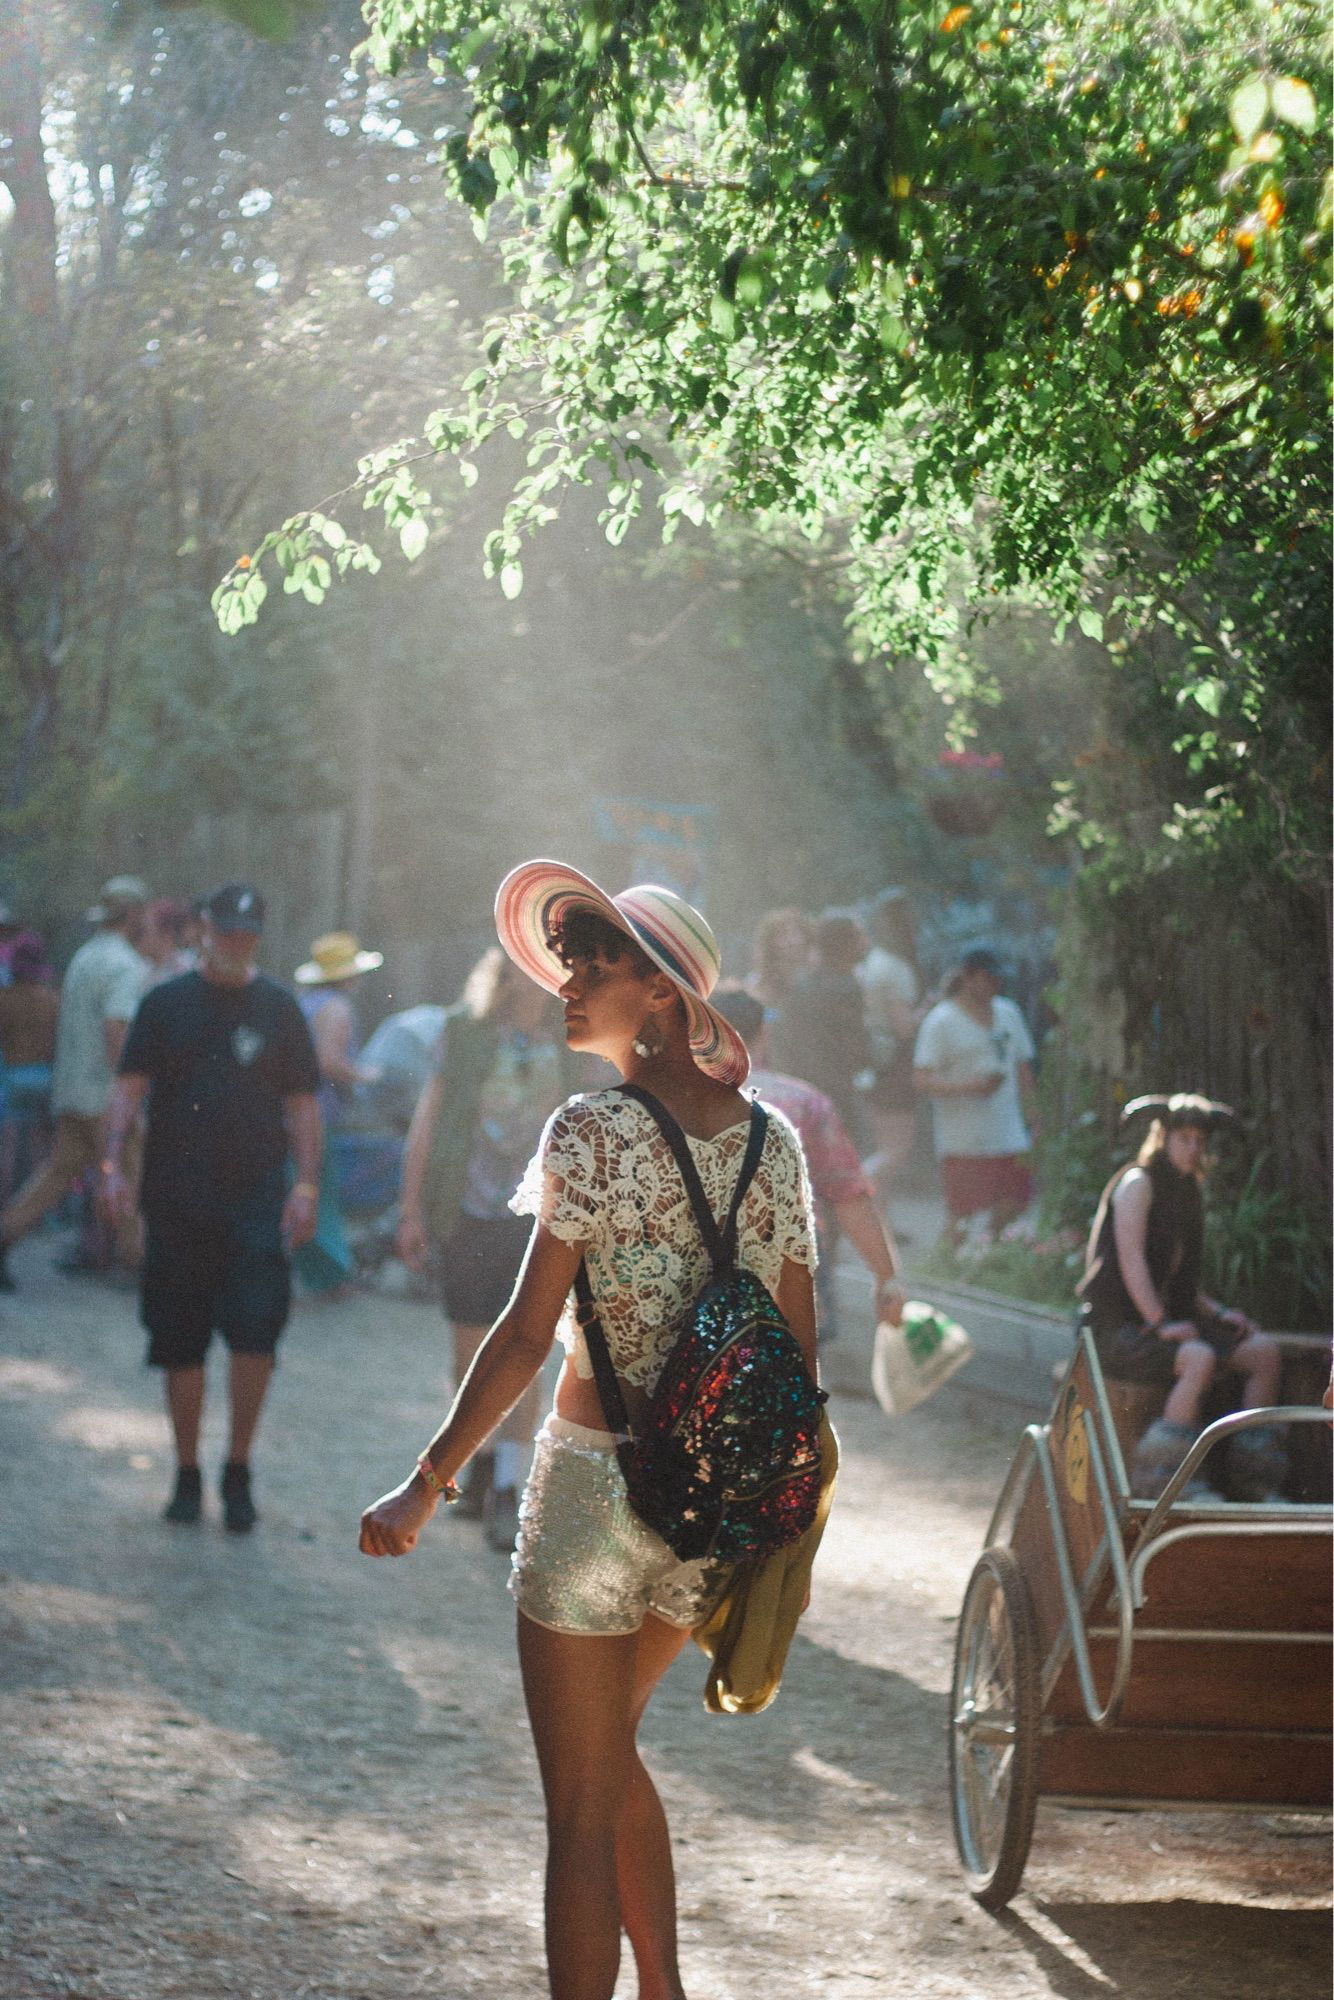 A person walking through a sunny, tree-lined path at a festival. They wear a large pink hat, a white lace top, and shiny silver shorts, with a colorful backpack. The path is filled with other festival-goers, and the sunlight creates a soft, hazy glow through the trees.